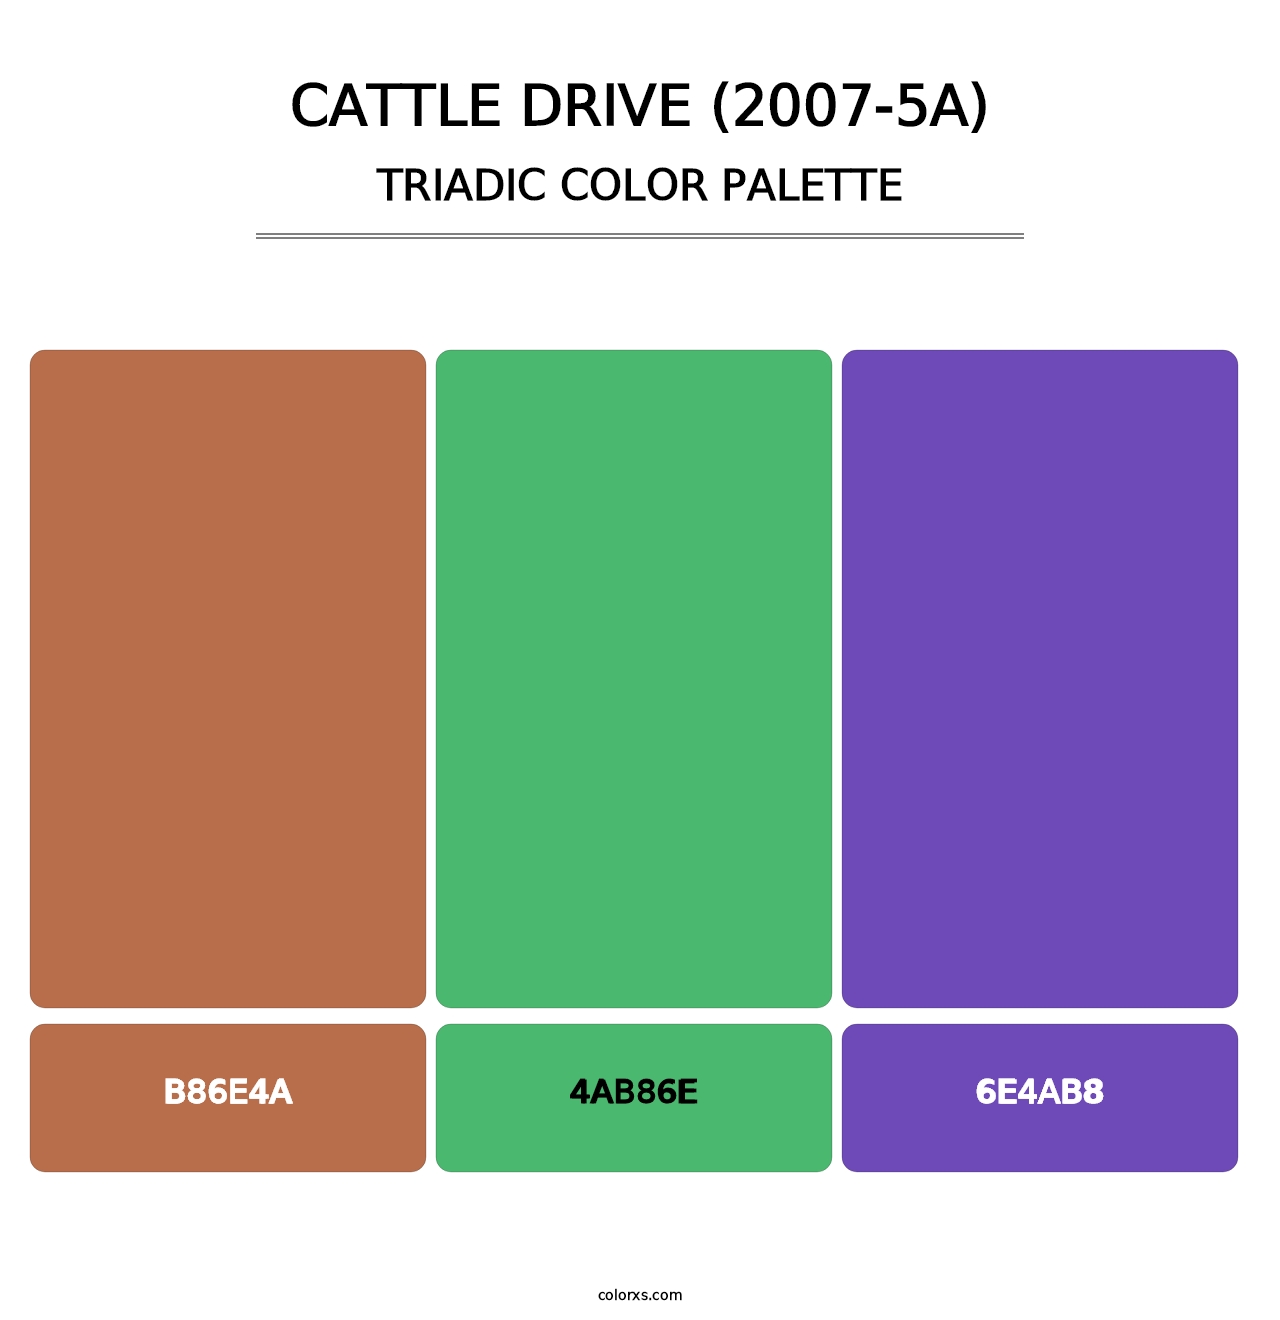 Cattle Drive (2007-5A) - Triadic Color Palette